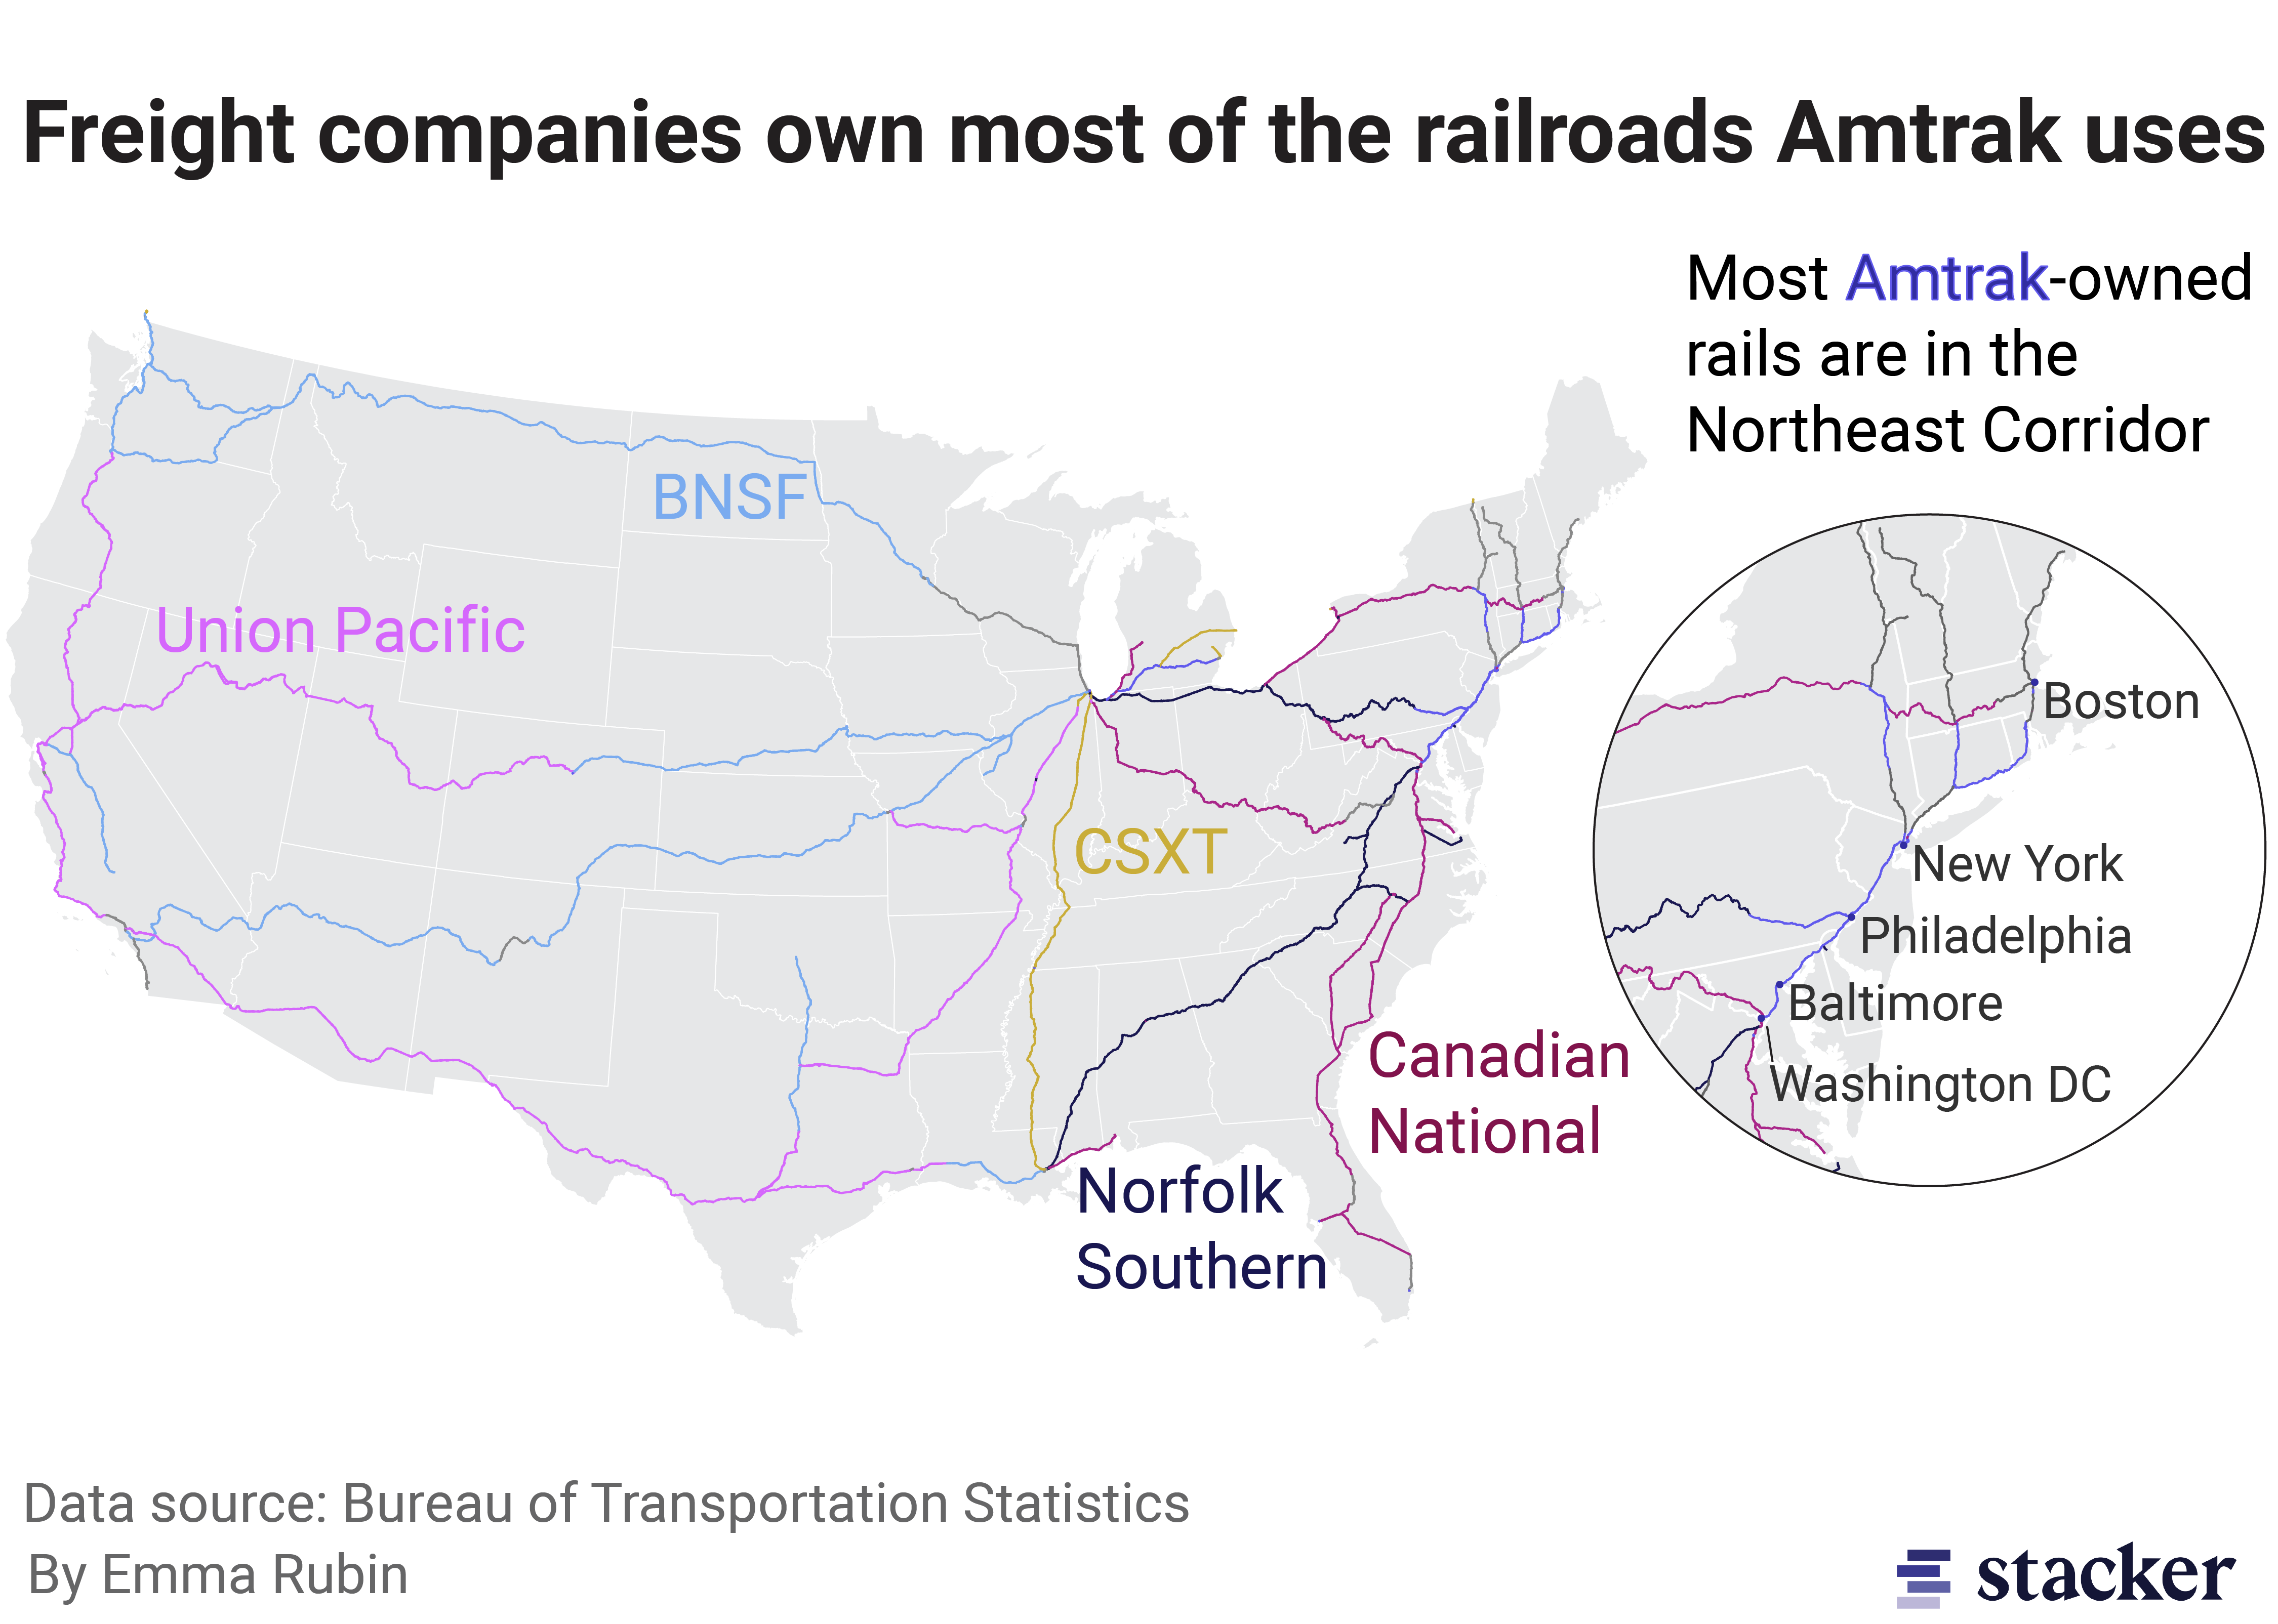 Map of Amtrak routes color coded by rail ownership. Amtrak does not own the majority of the rail it uses.